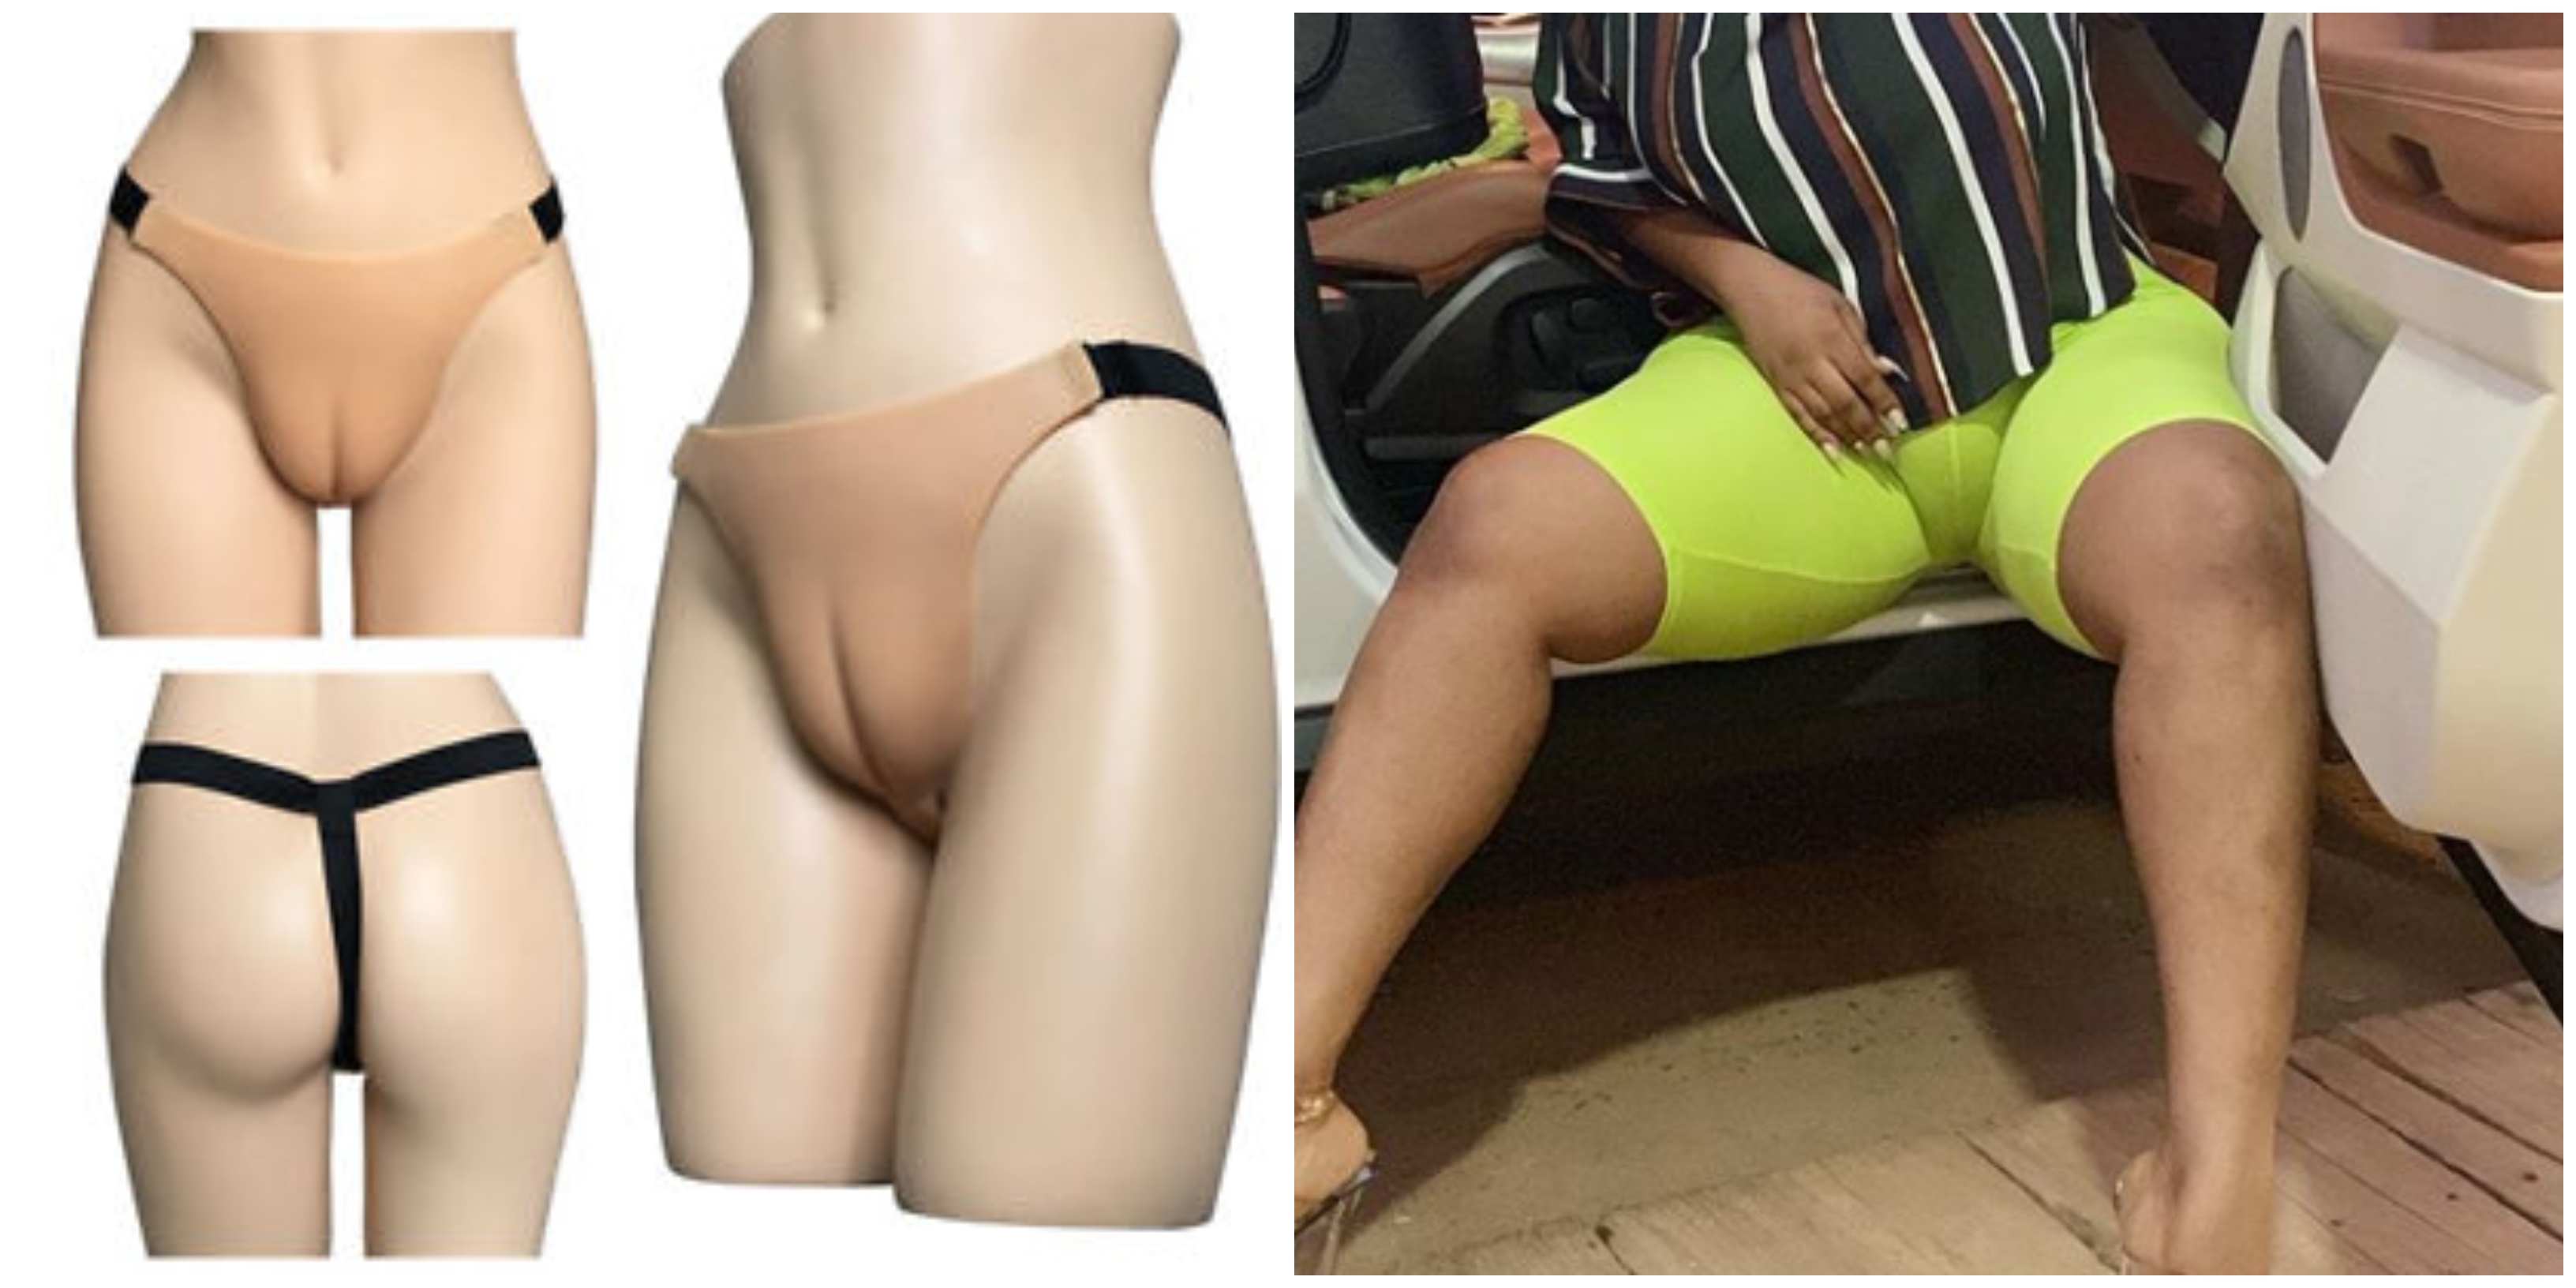 All you need to know about the fake camel toe trend | Pulse Ghana